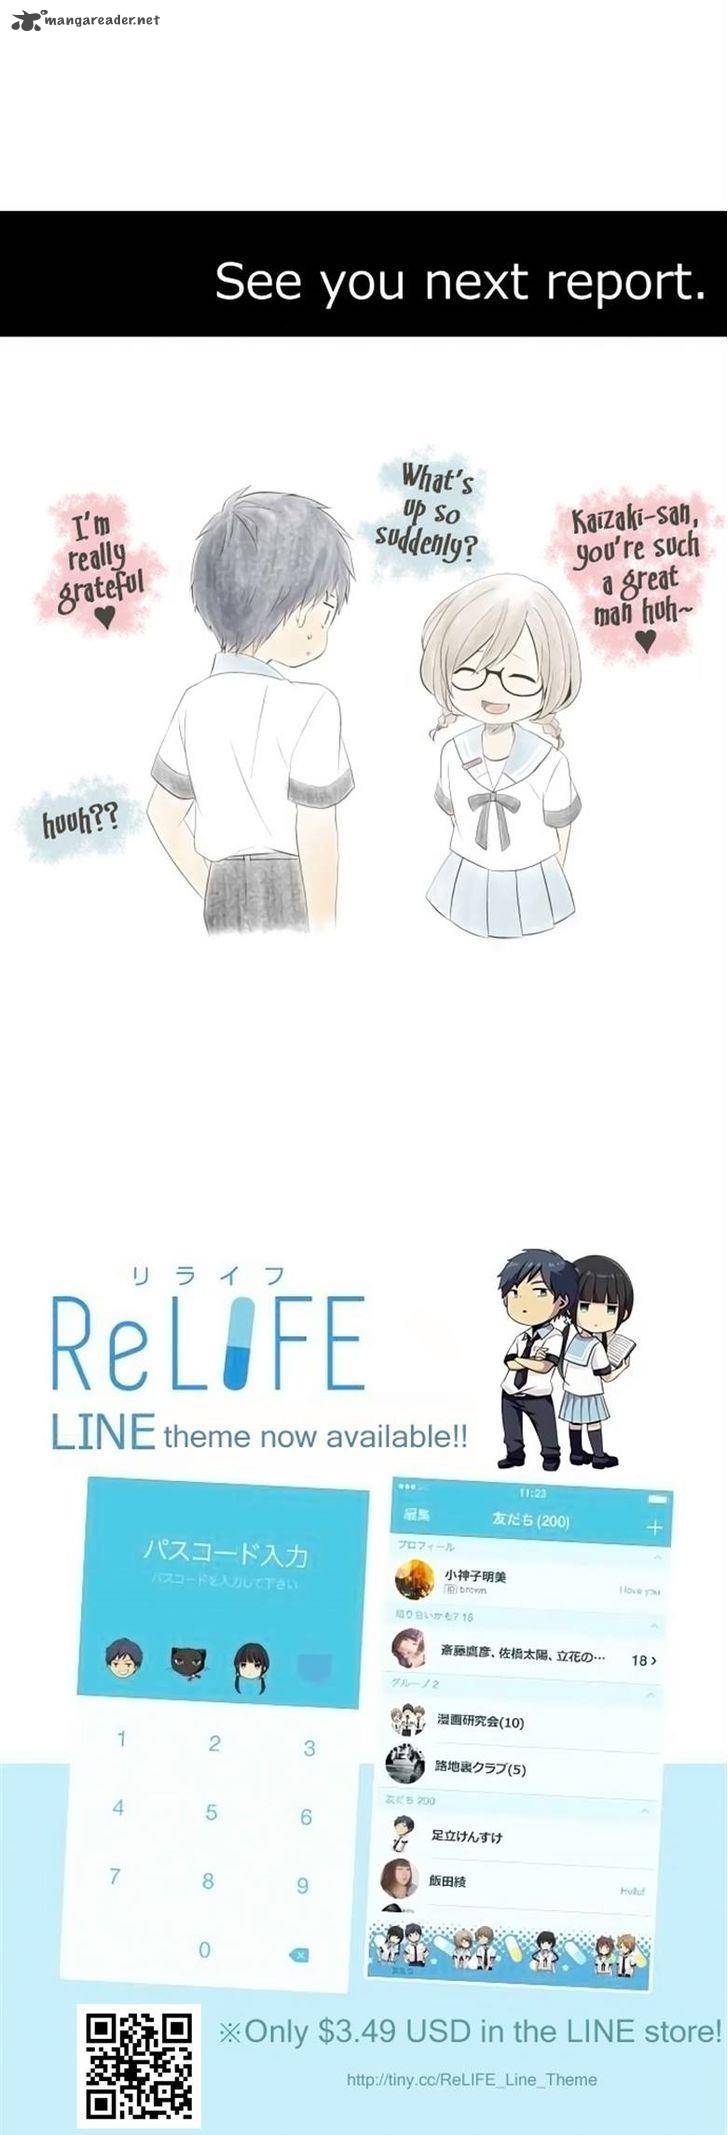 relife_131_25